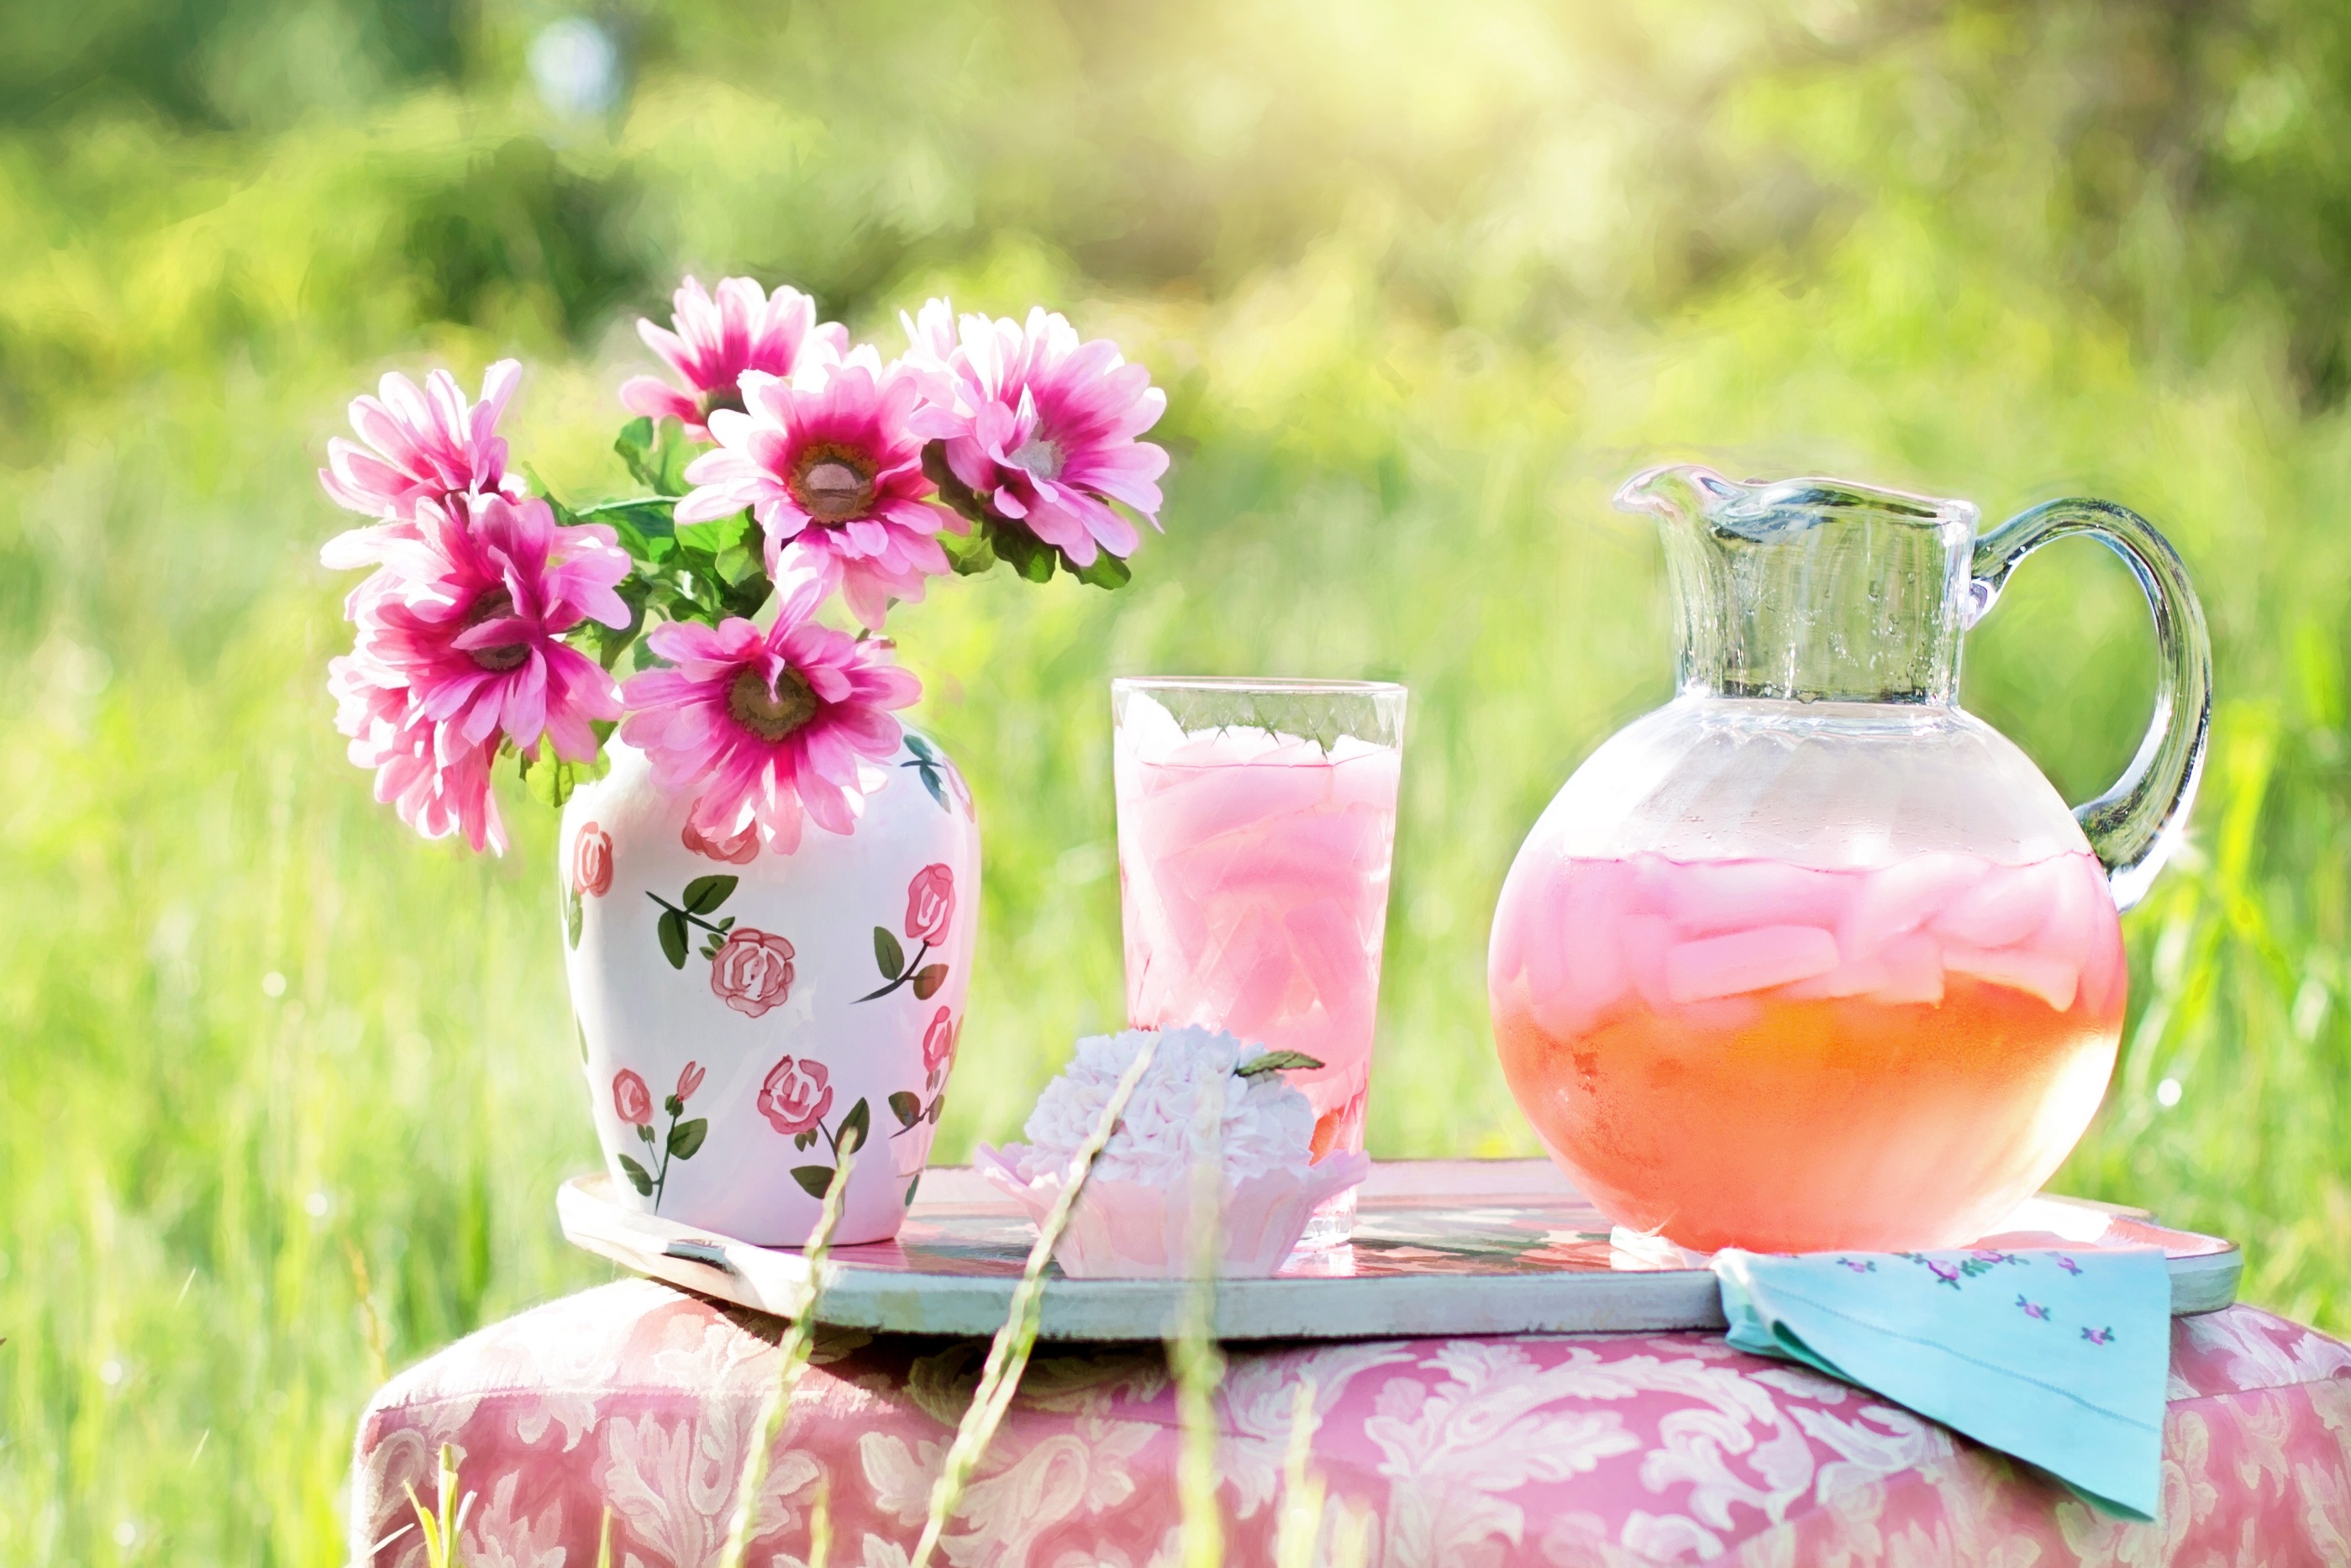 Lemonade and flowers on the tray photo